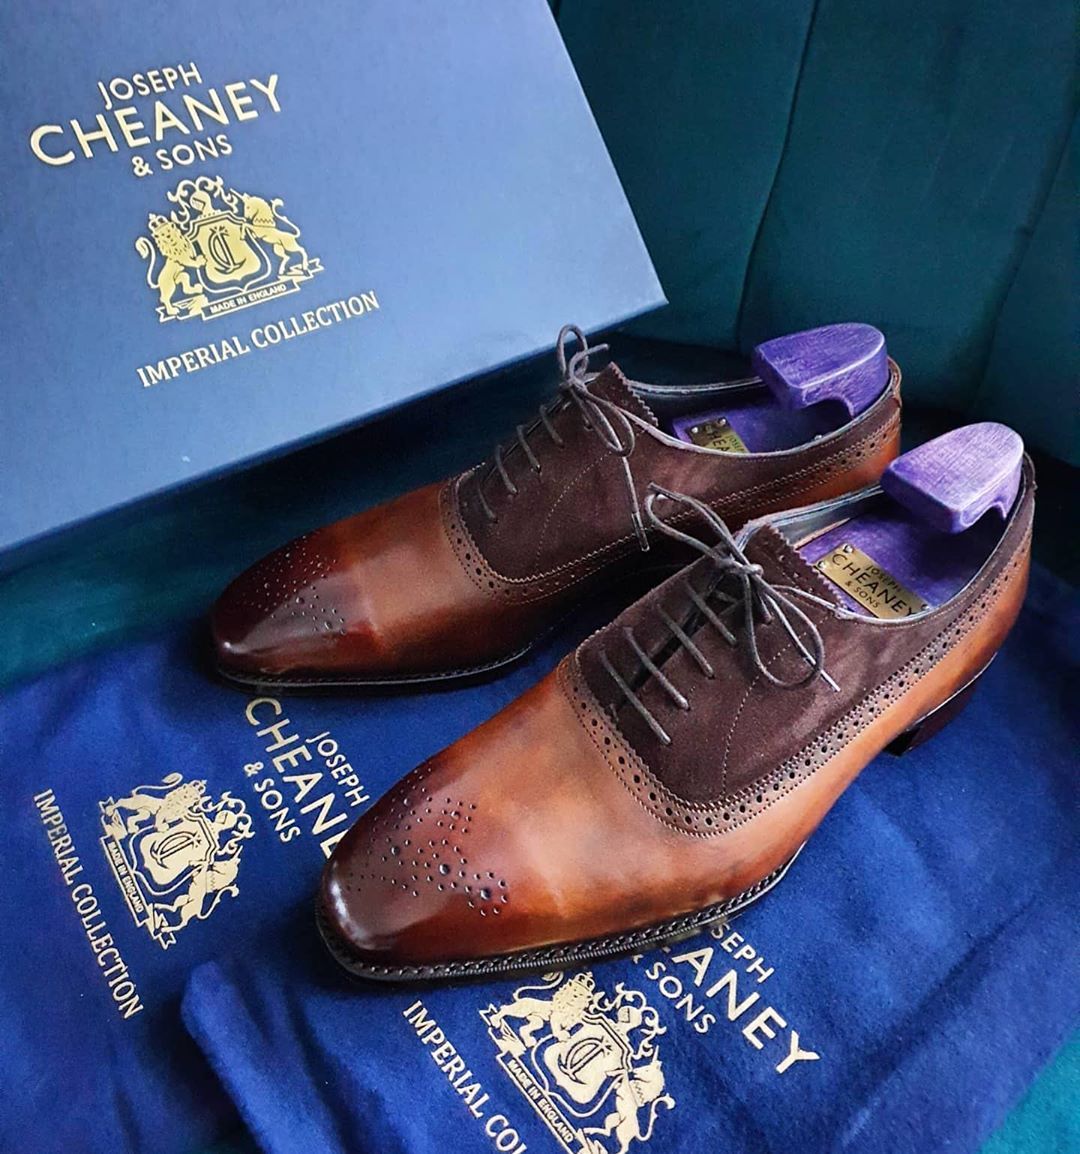 Joseph Cheaney’s Imperial Collection в English Brands - новинки 2020 года